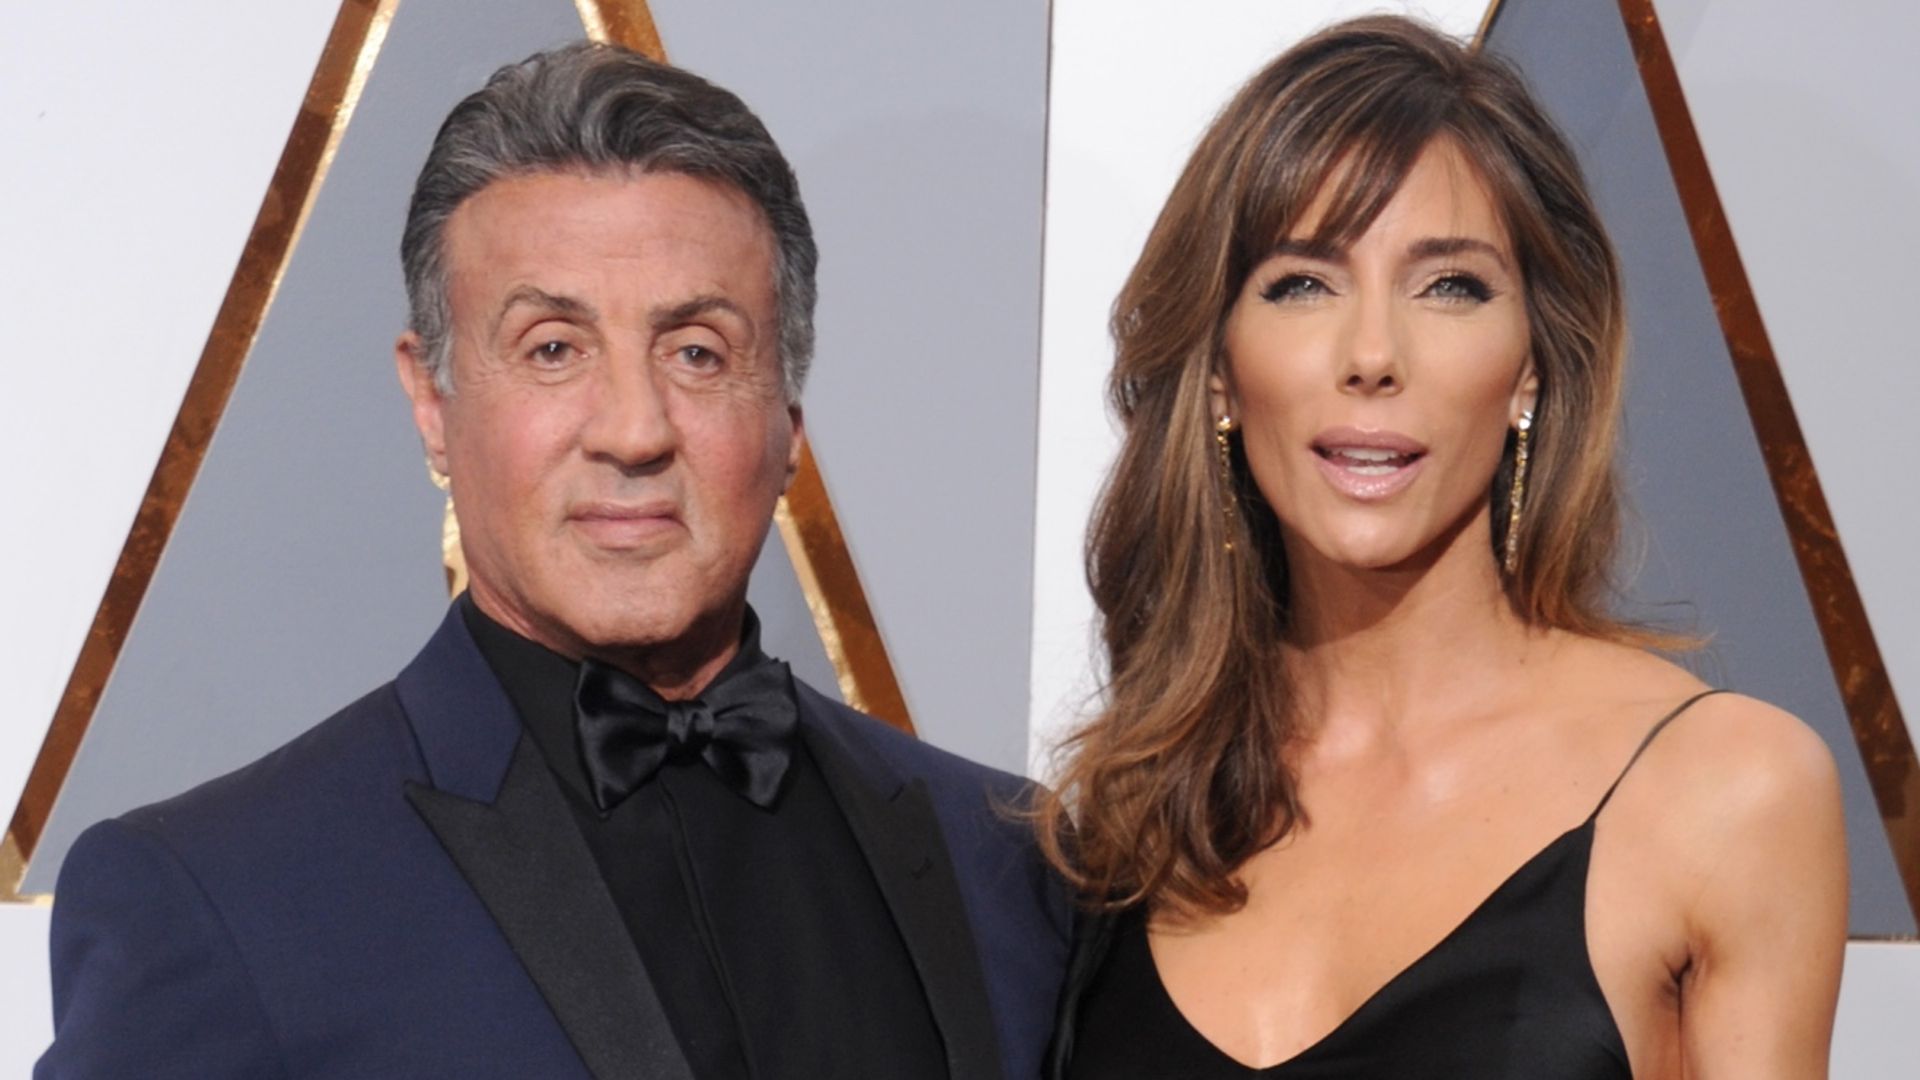 Sylvester Stallone's wife Jennifer Flavin files for divorce after 25 years  of marriage  